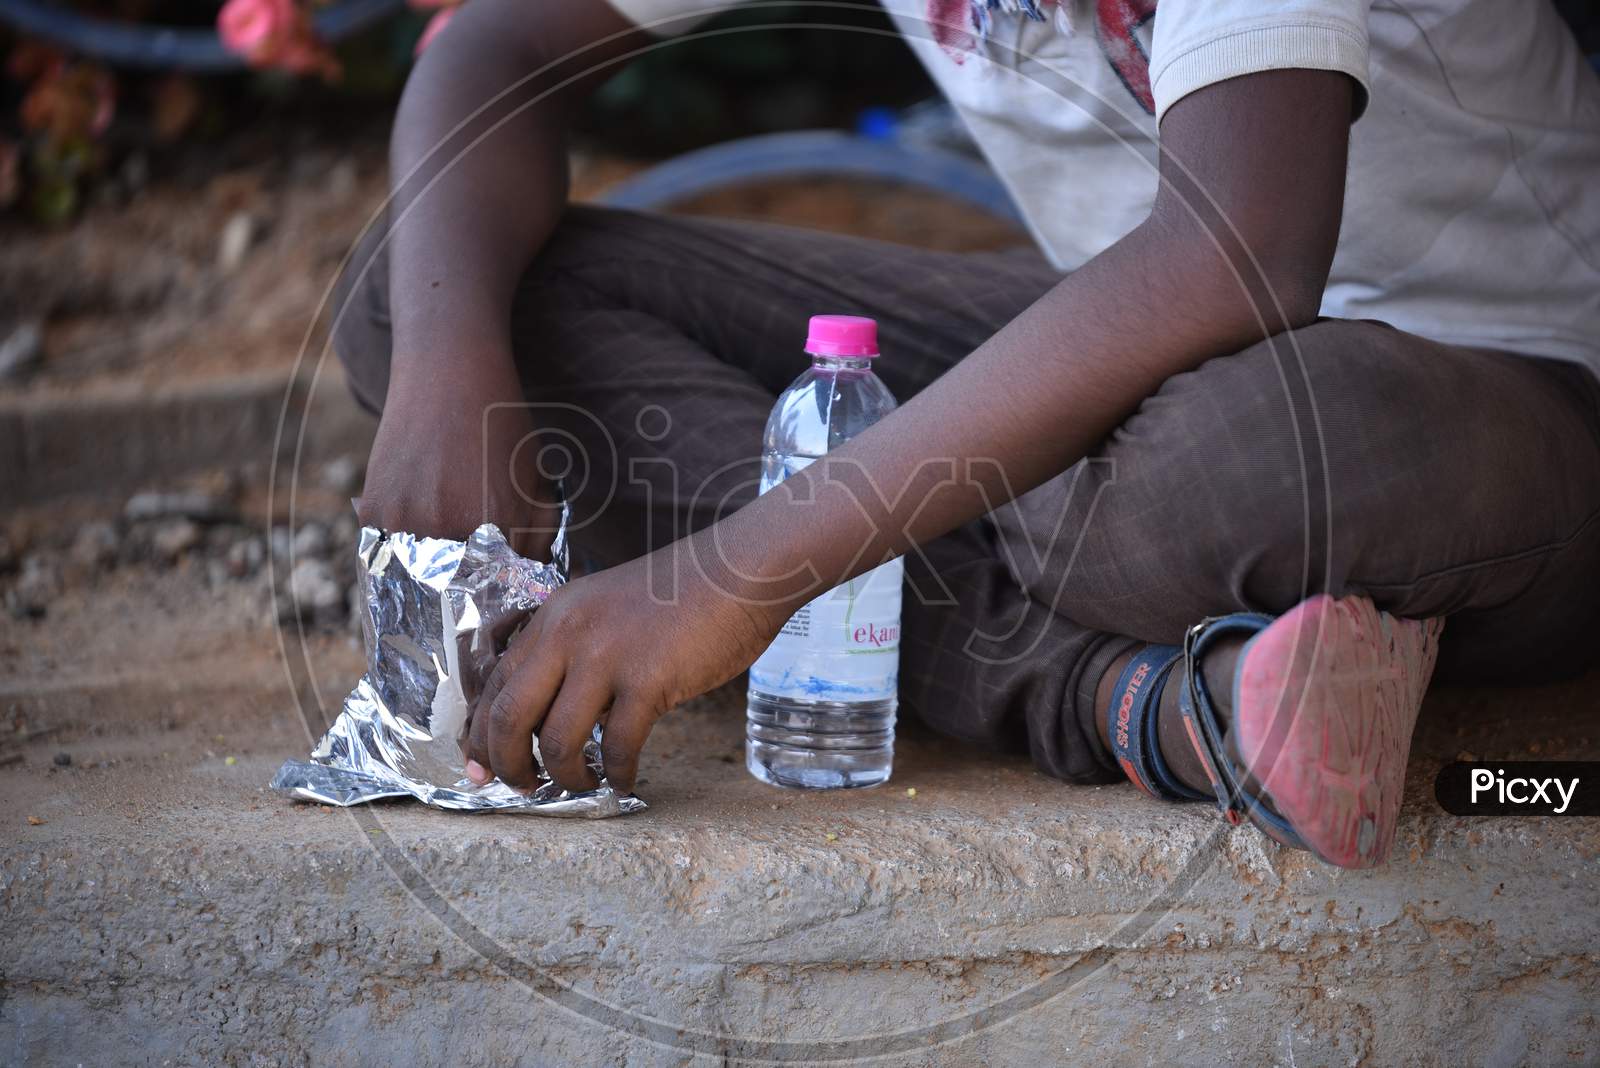 a migrant worker's son eats food that is distributed by donors during nationwide lockdown amid coronavirus pandemic, April 8,2020, Hyderabad.